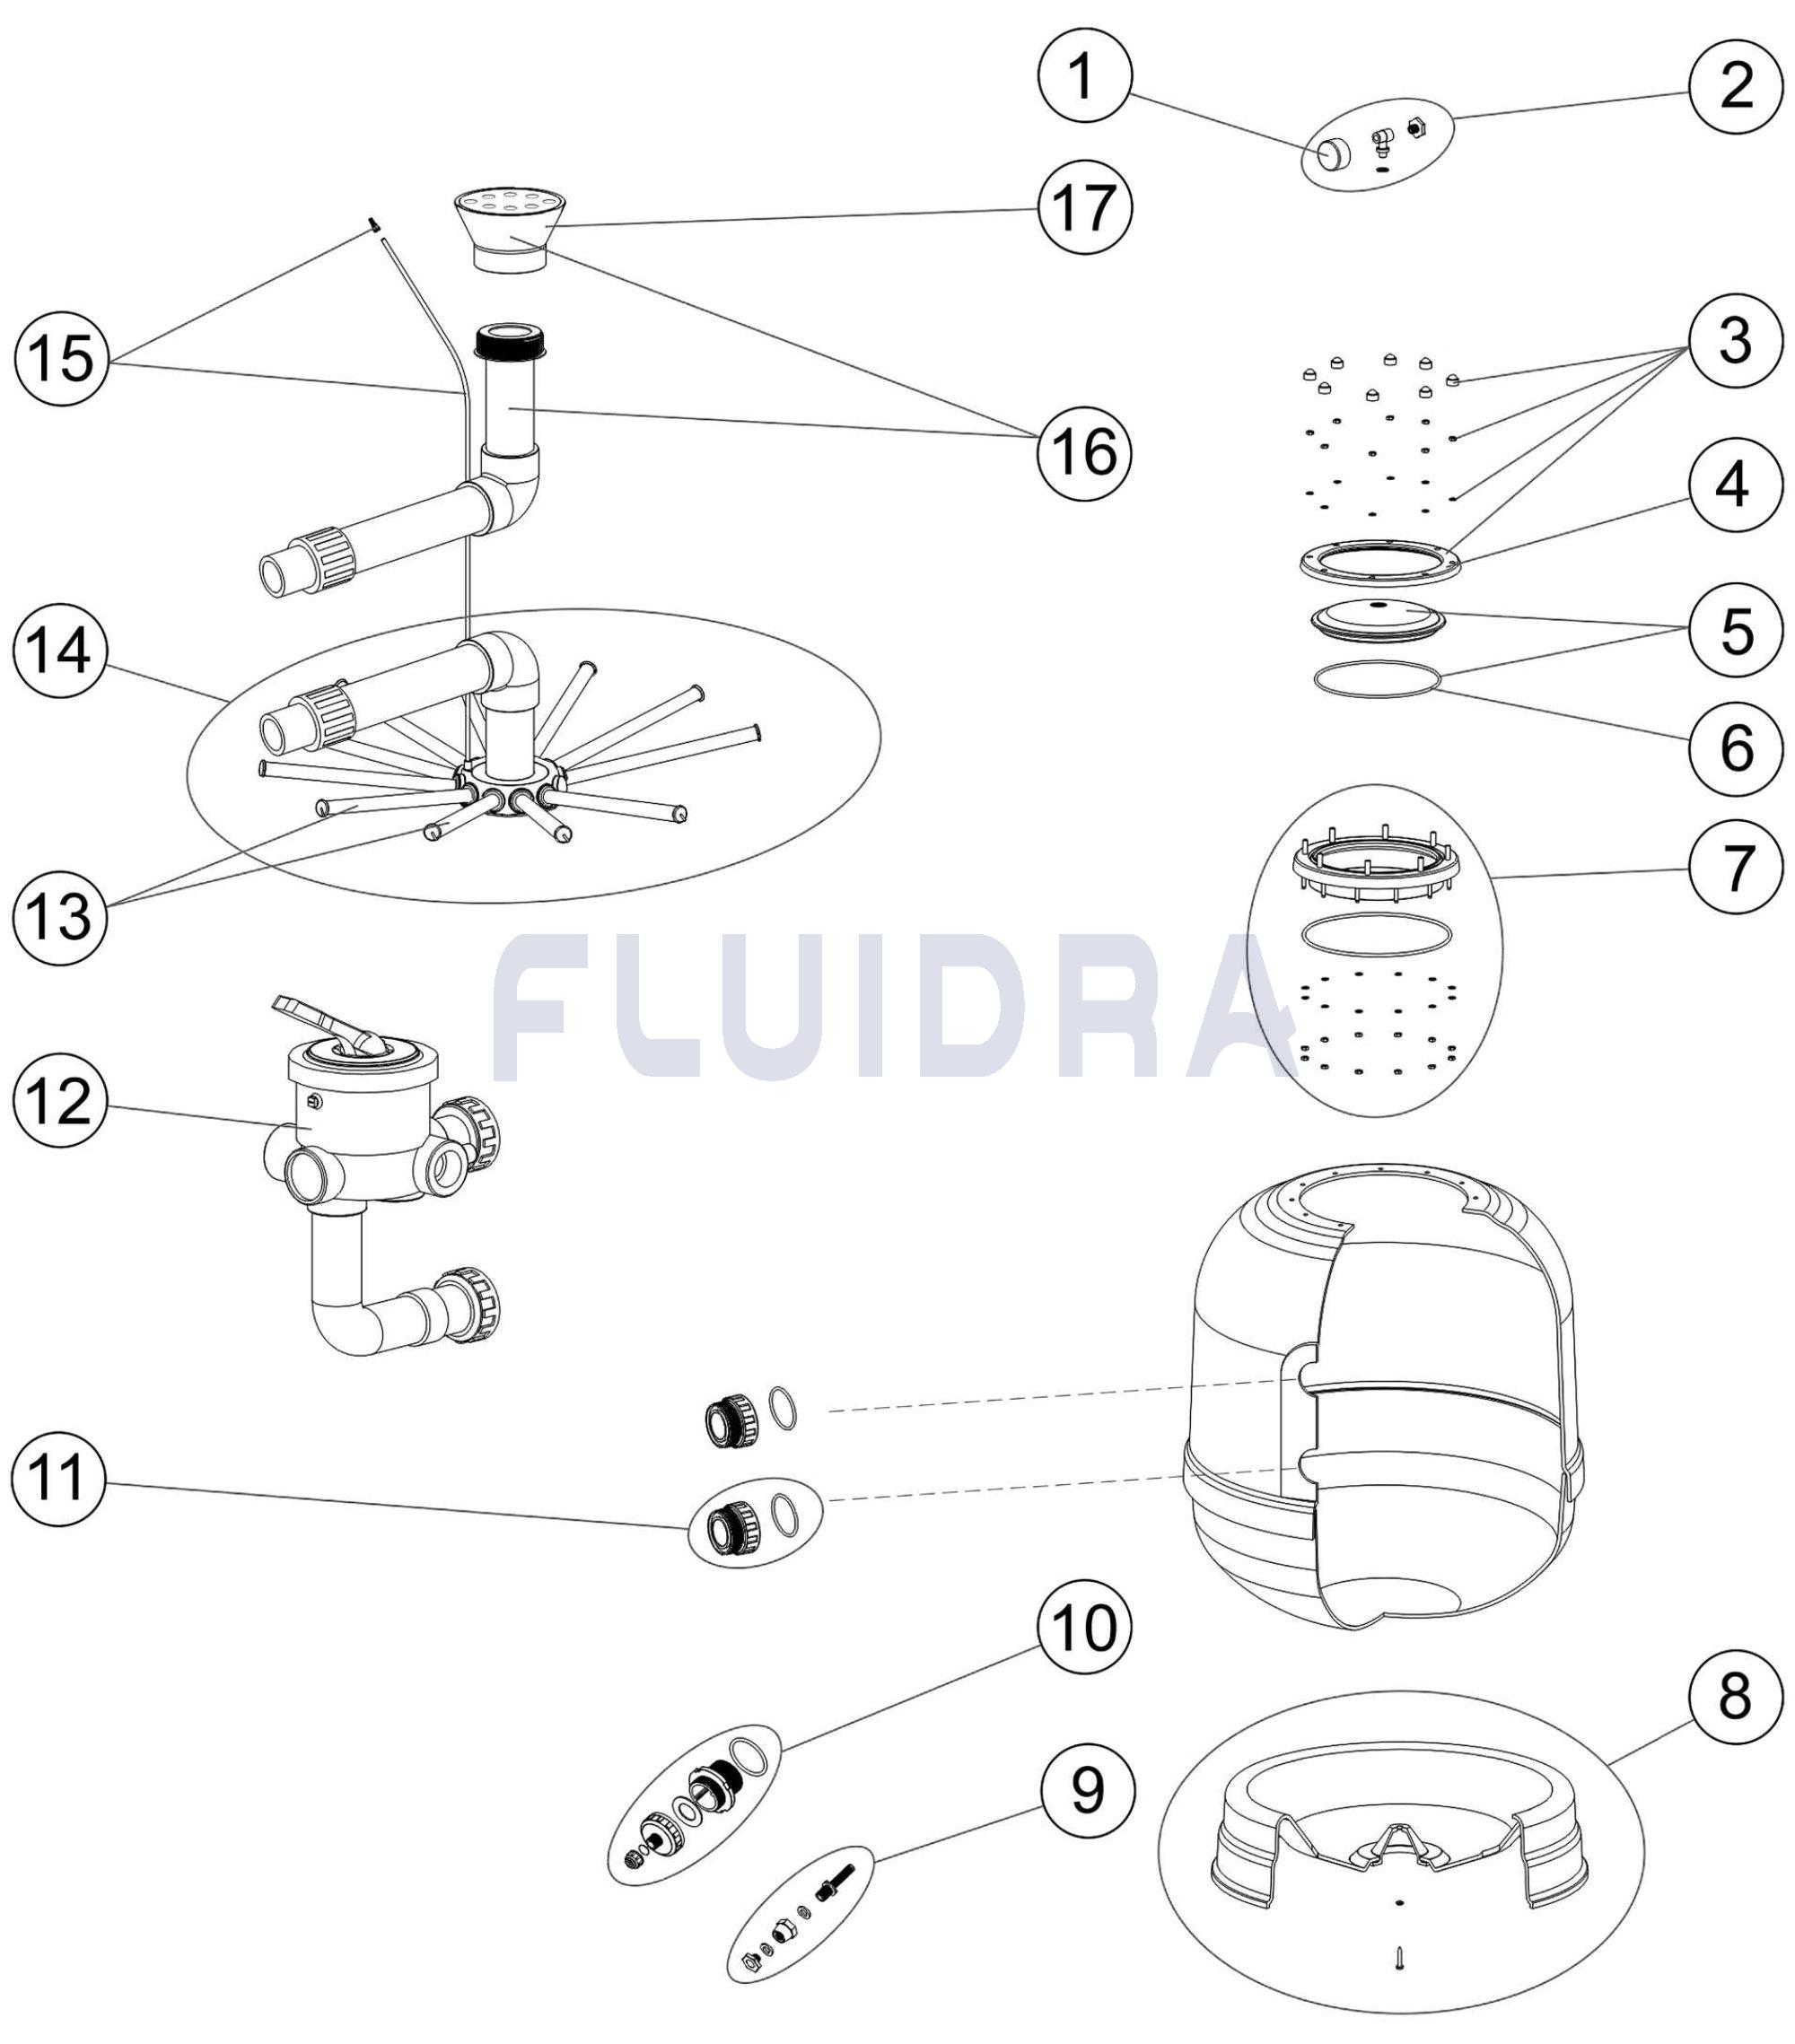 https://spareparts.astralpool.com/en/exploded-view.php?producto=WF000098